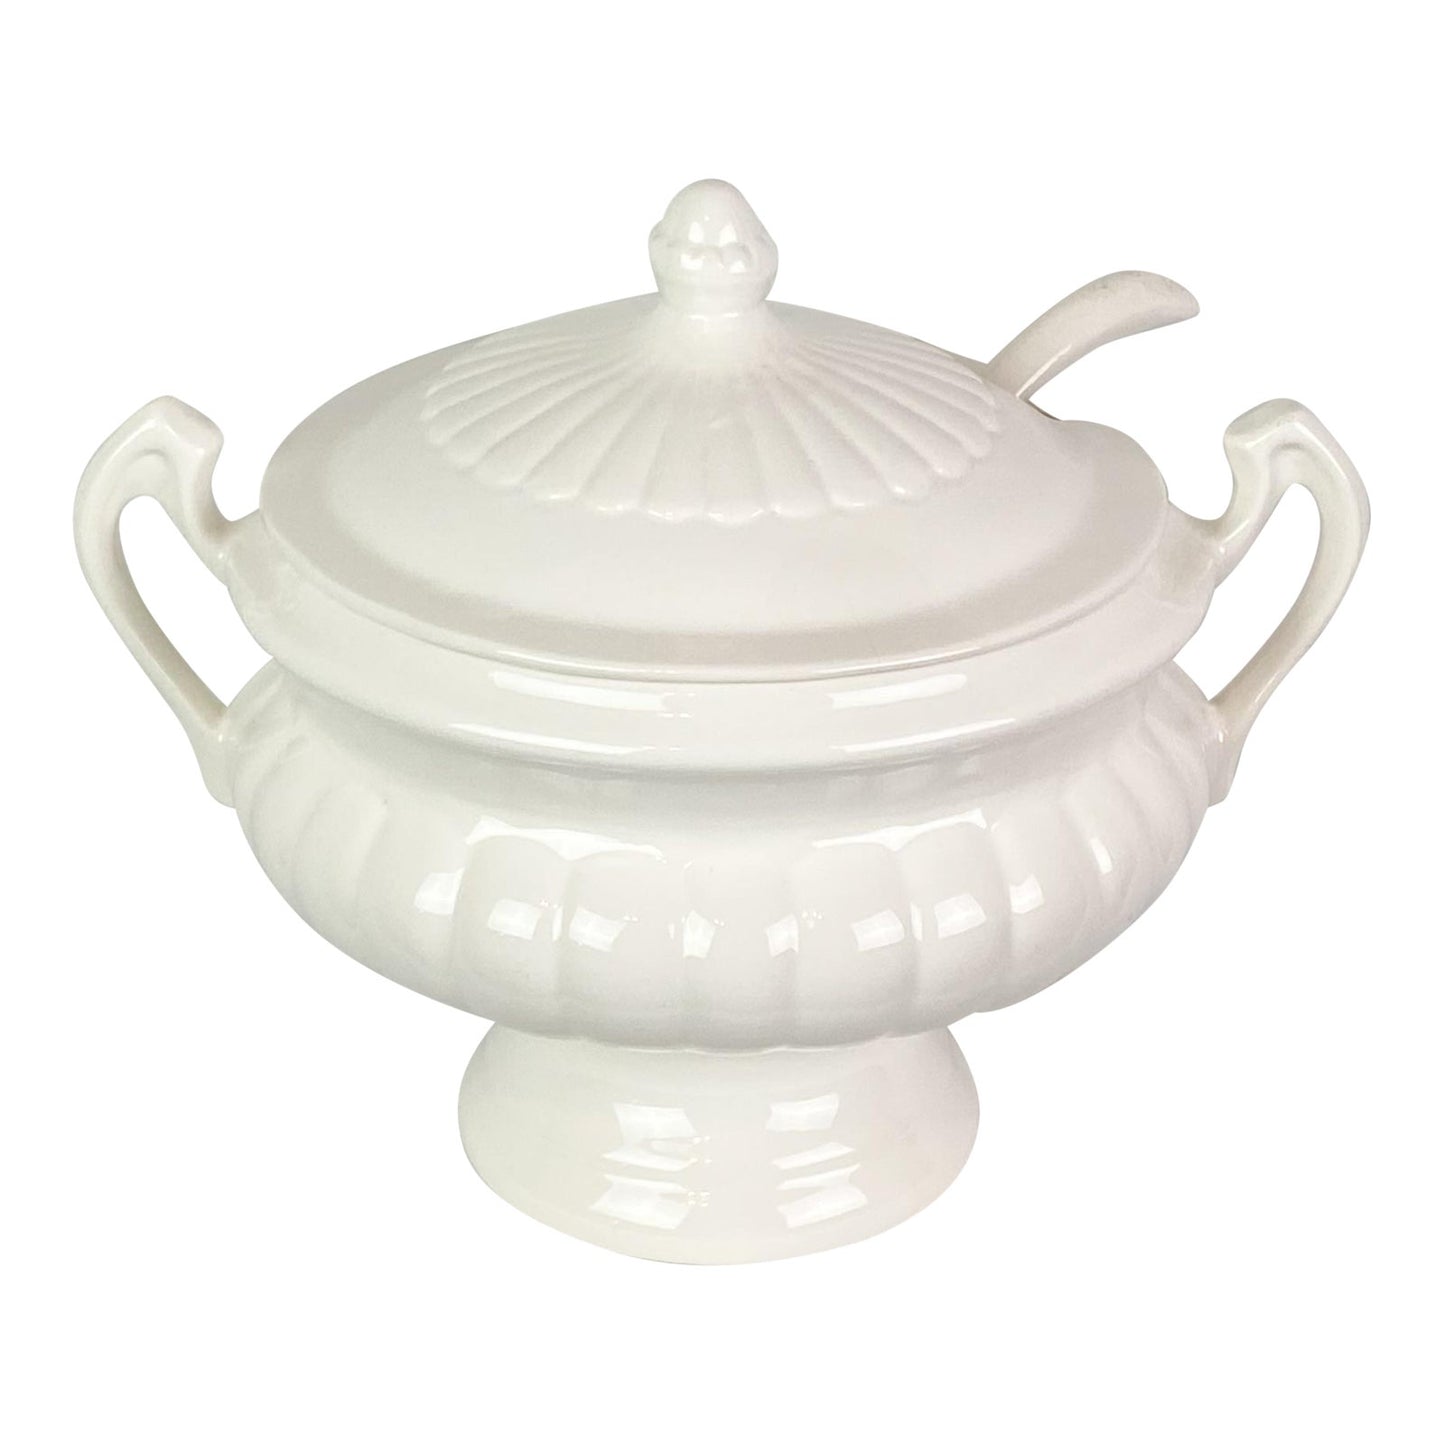 Classical White Soup Tureen Bowl